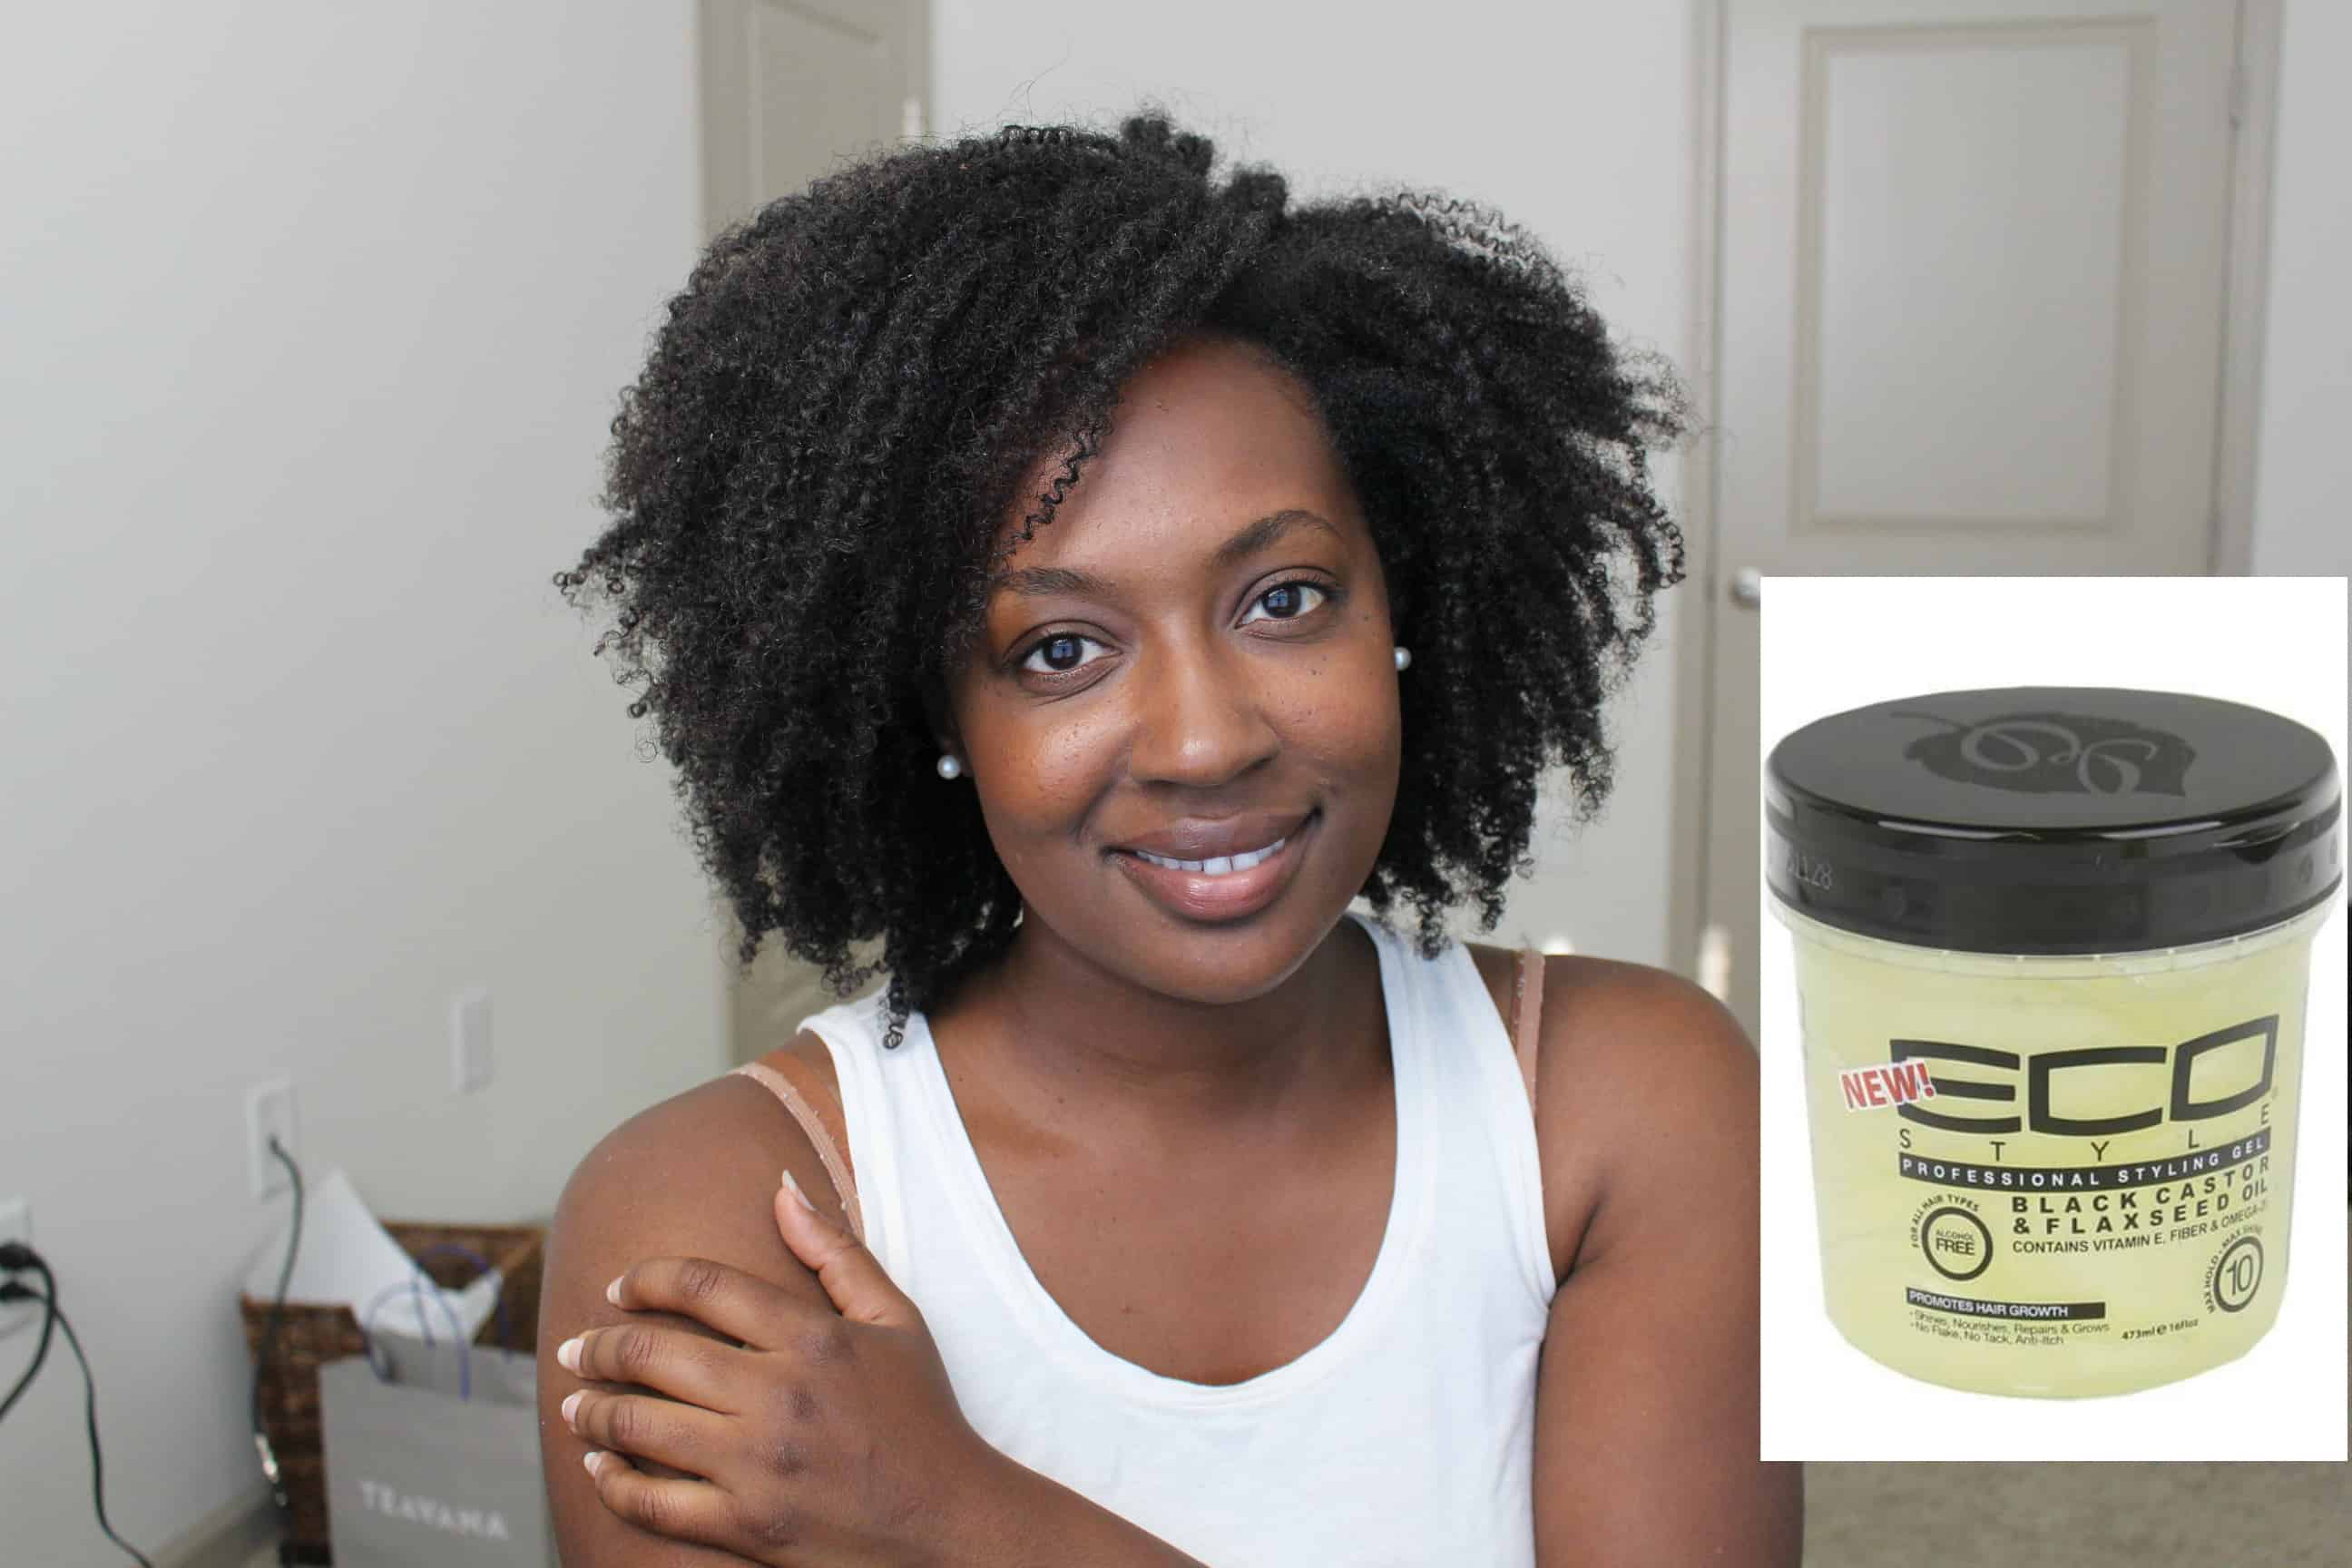 natural hair style Archives - A Love 4 Me